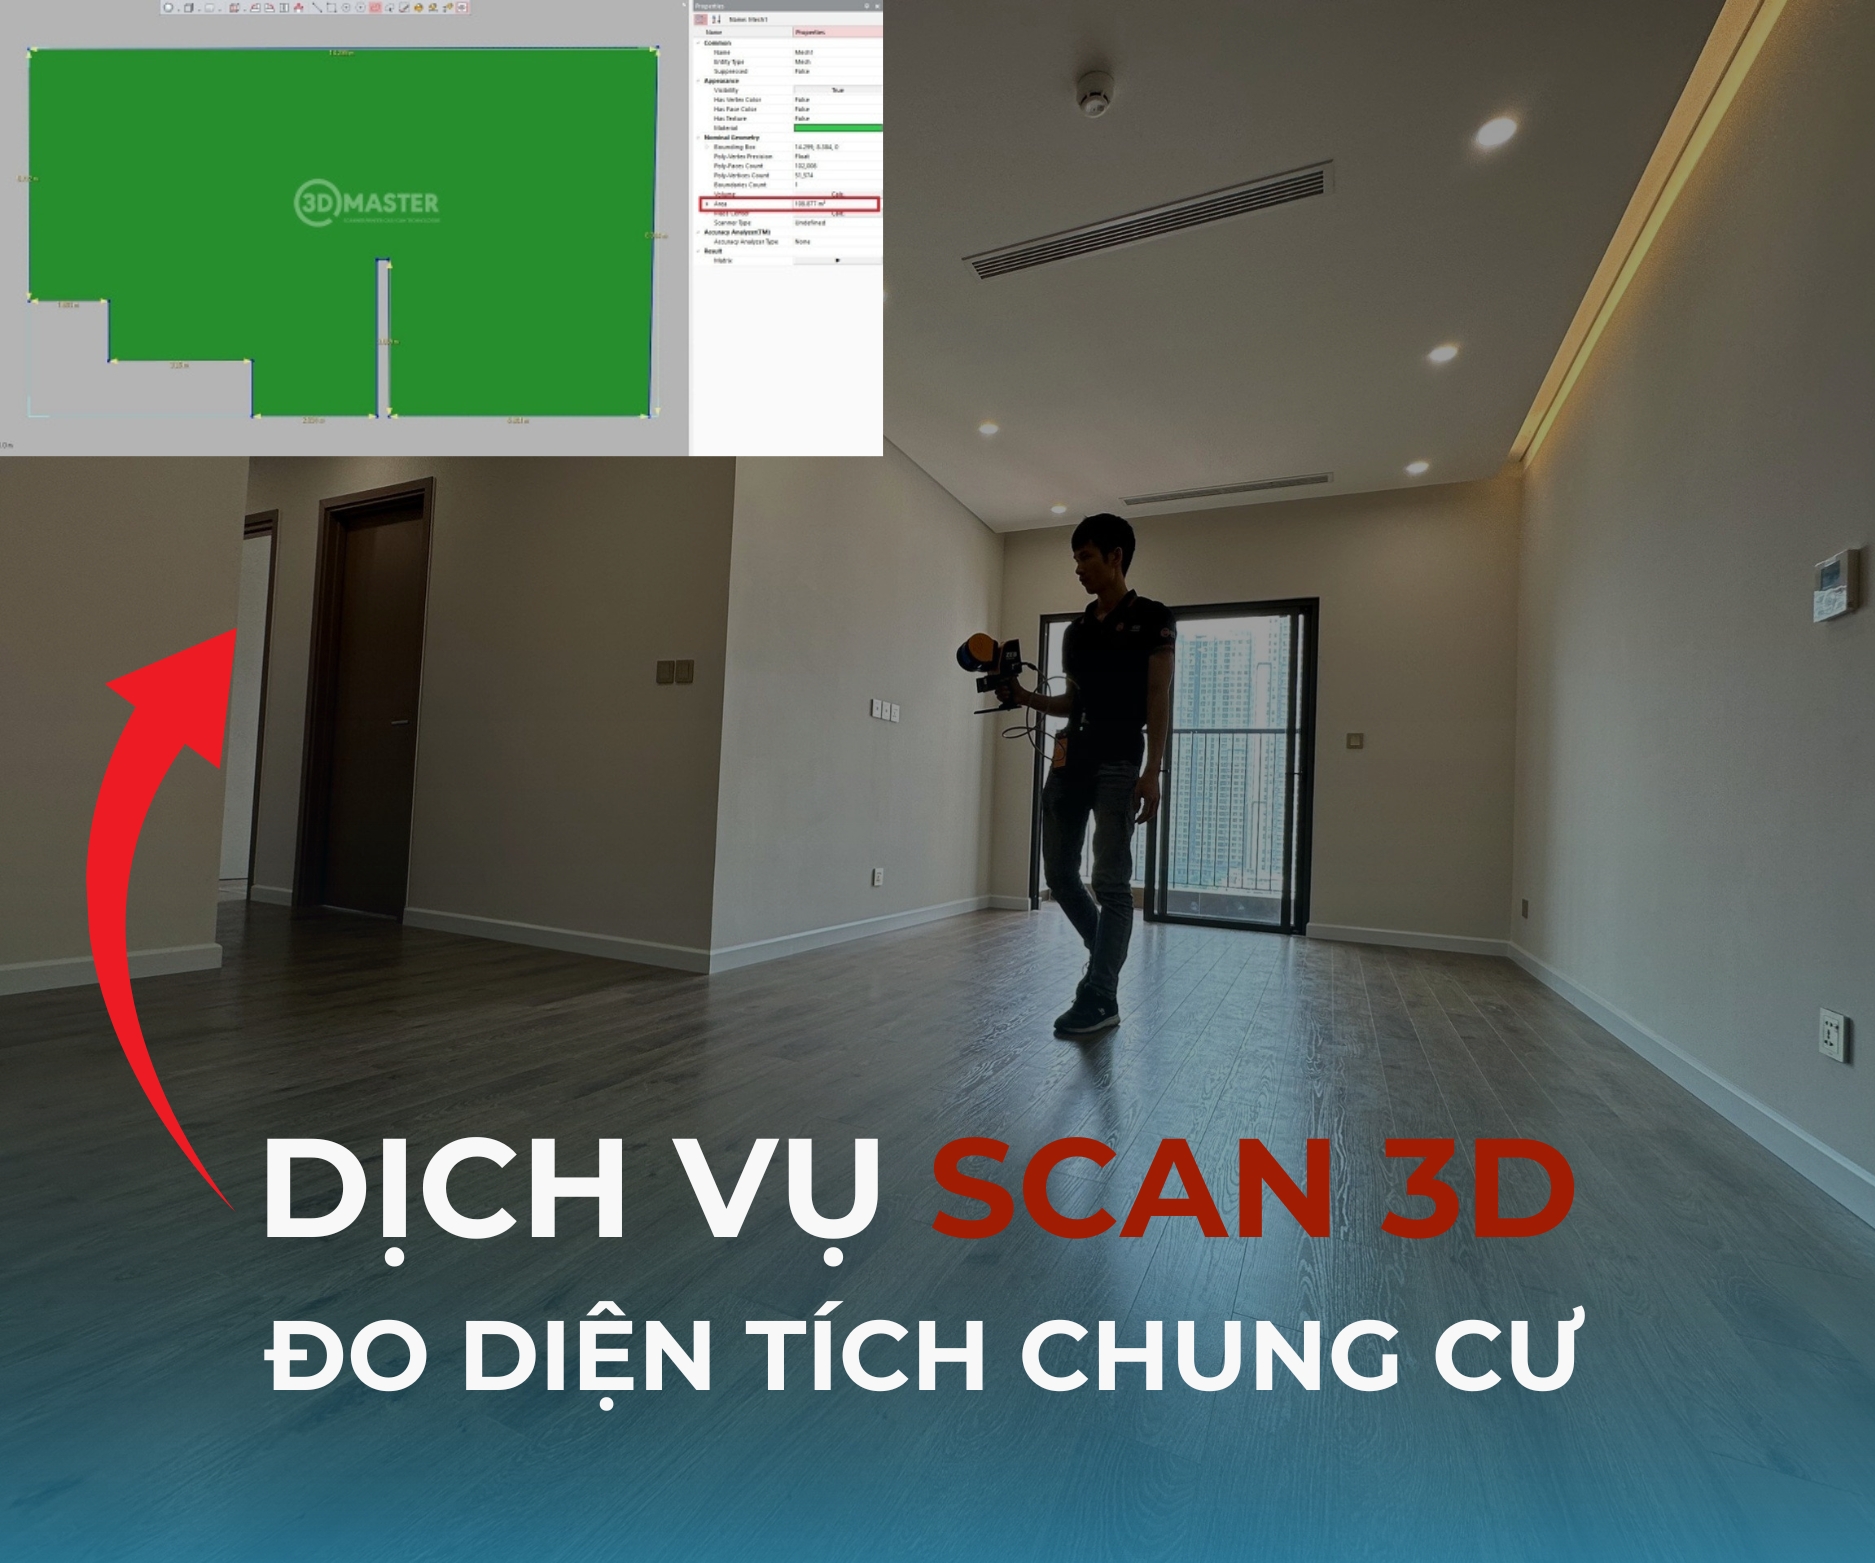 3D MASTER provides a comprehensive package of services for calculating floor area in the acceptance of contracts for the sale and purchase of condominiums